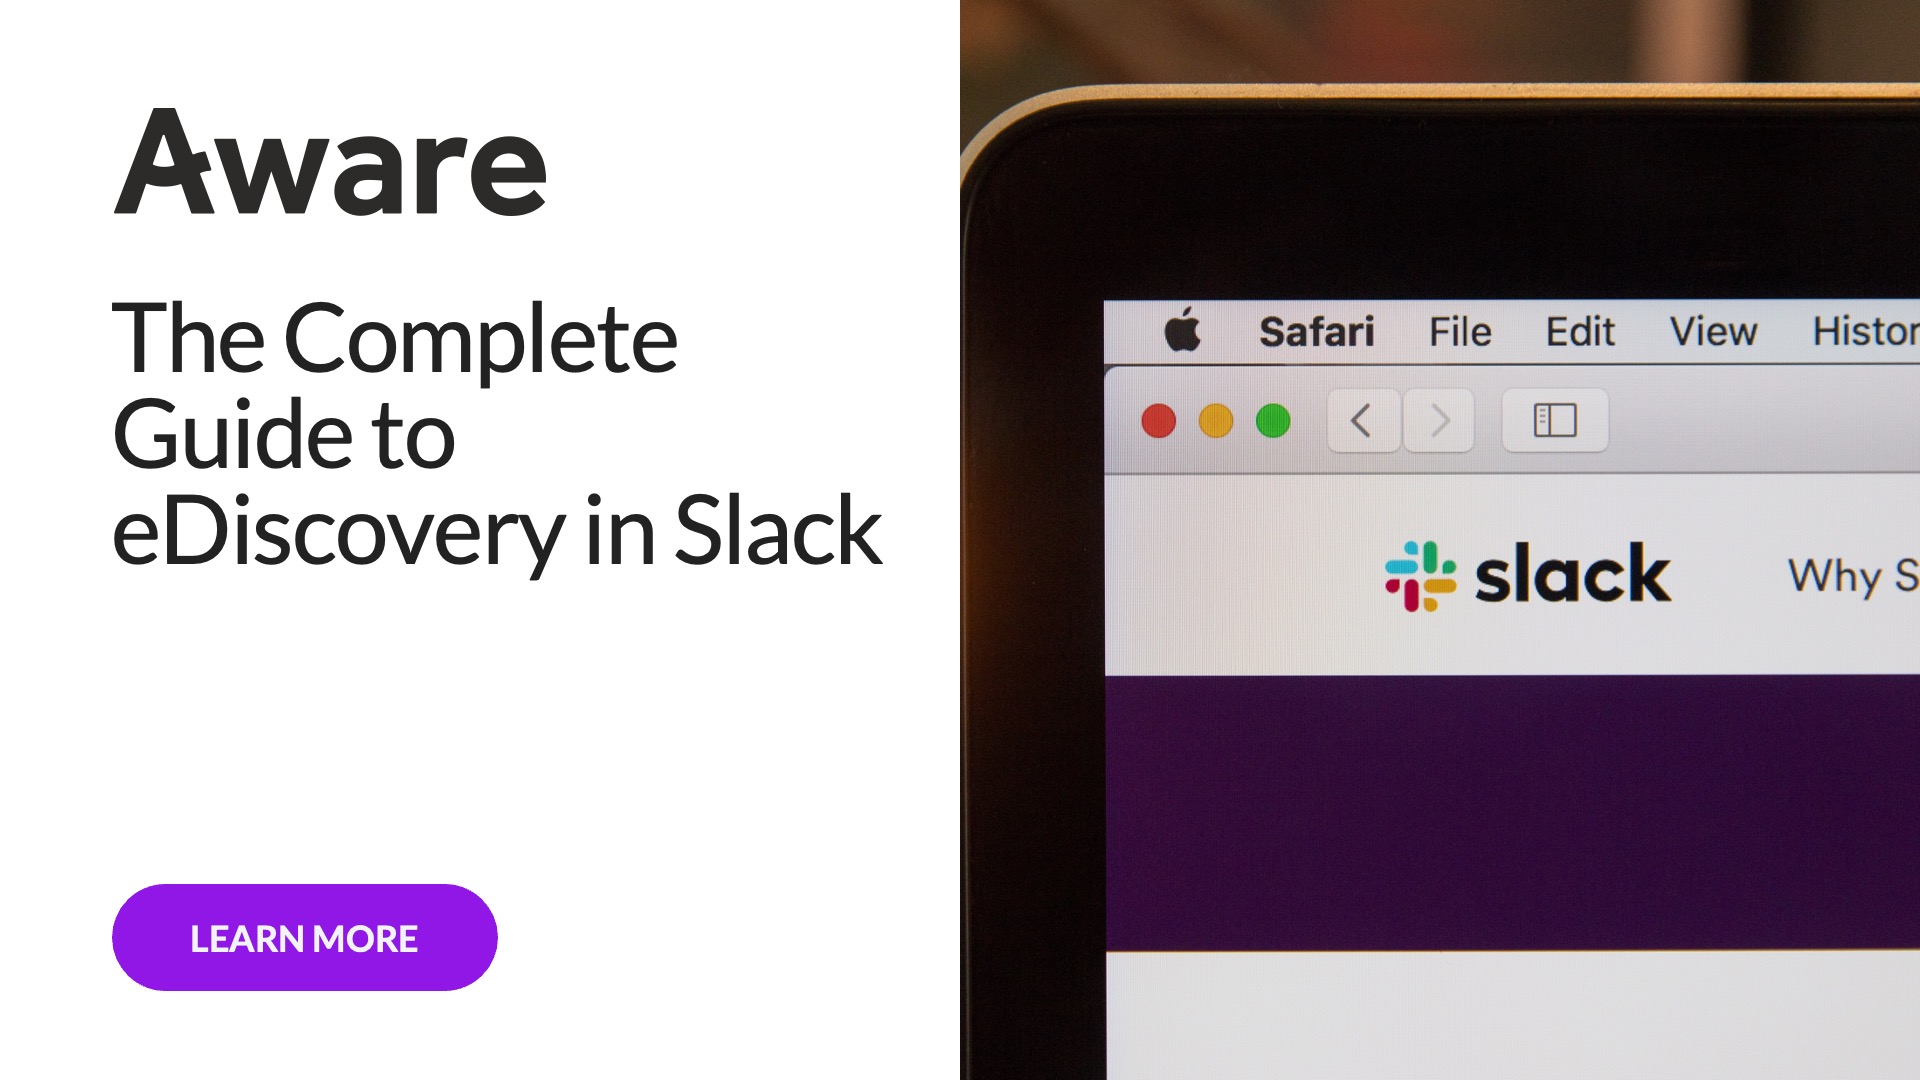 The Complete Guide to eDiscovery in Slack